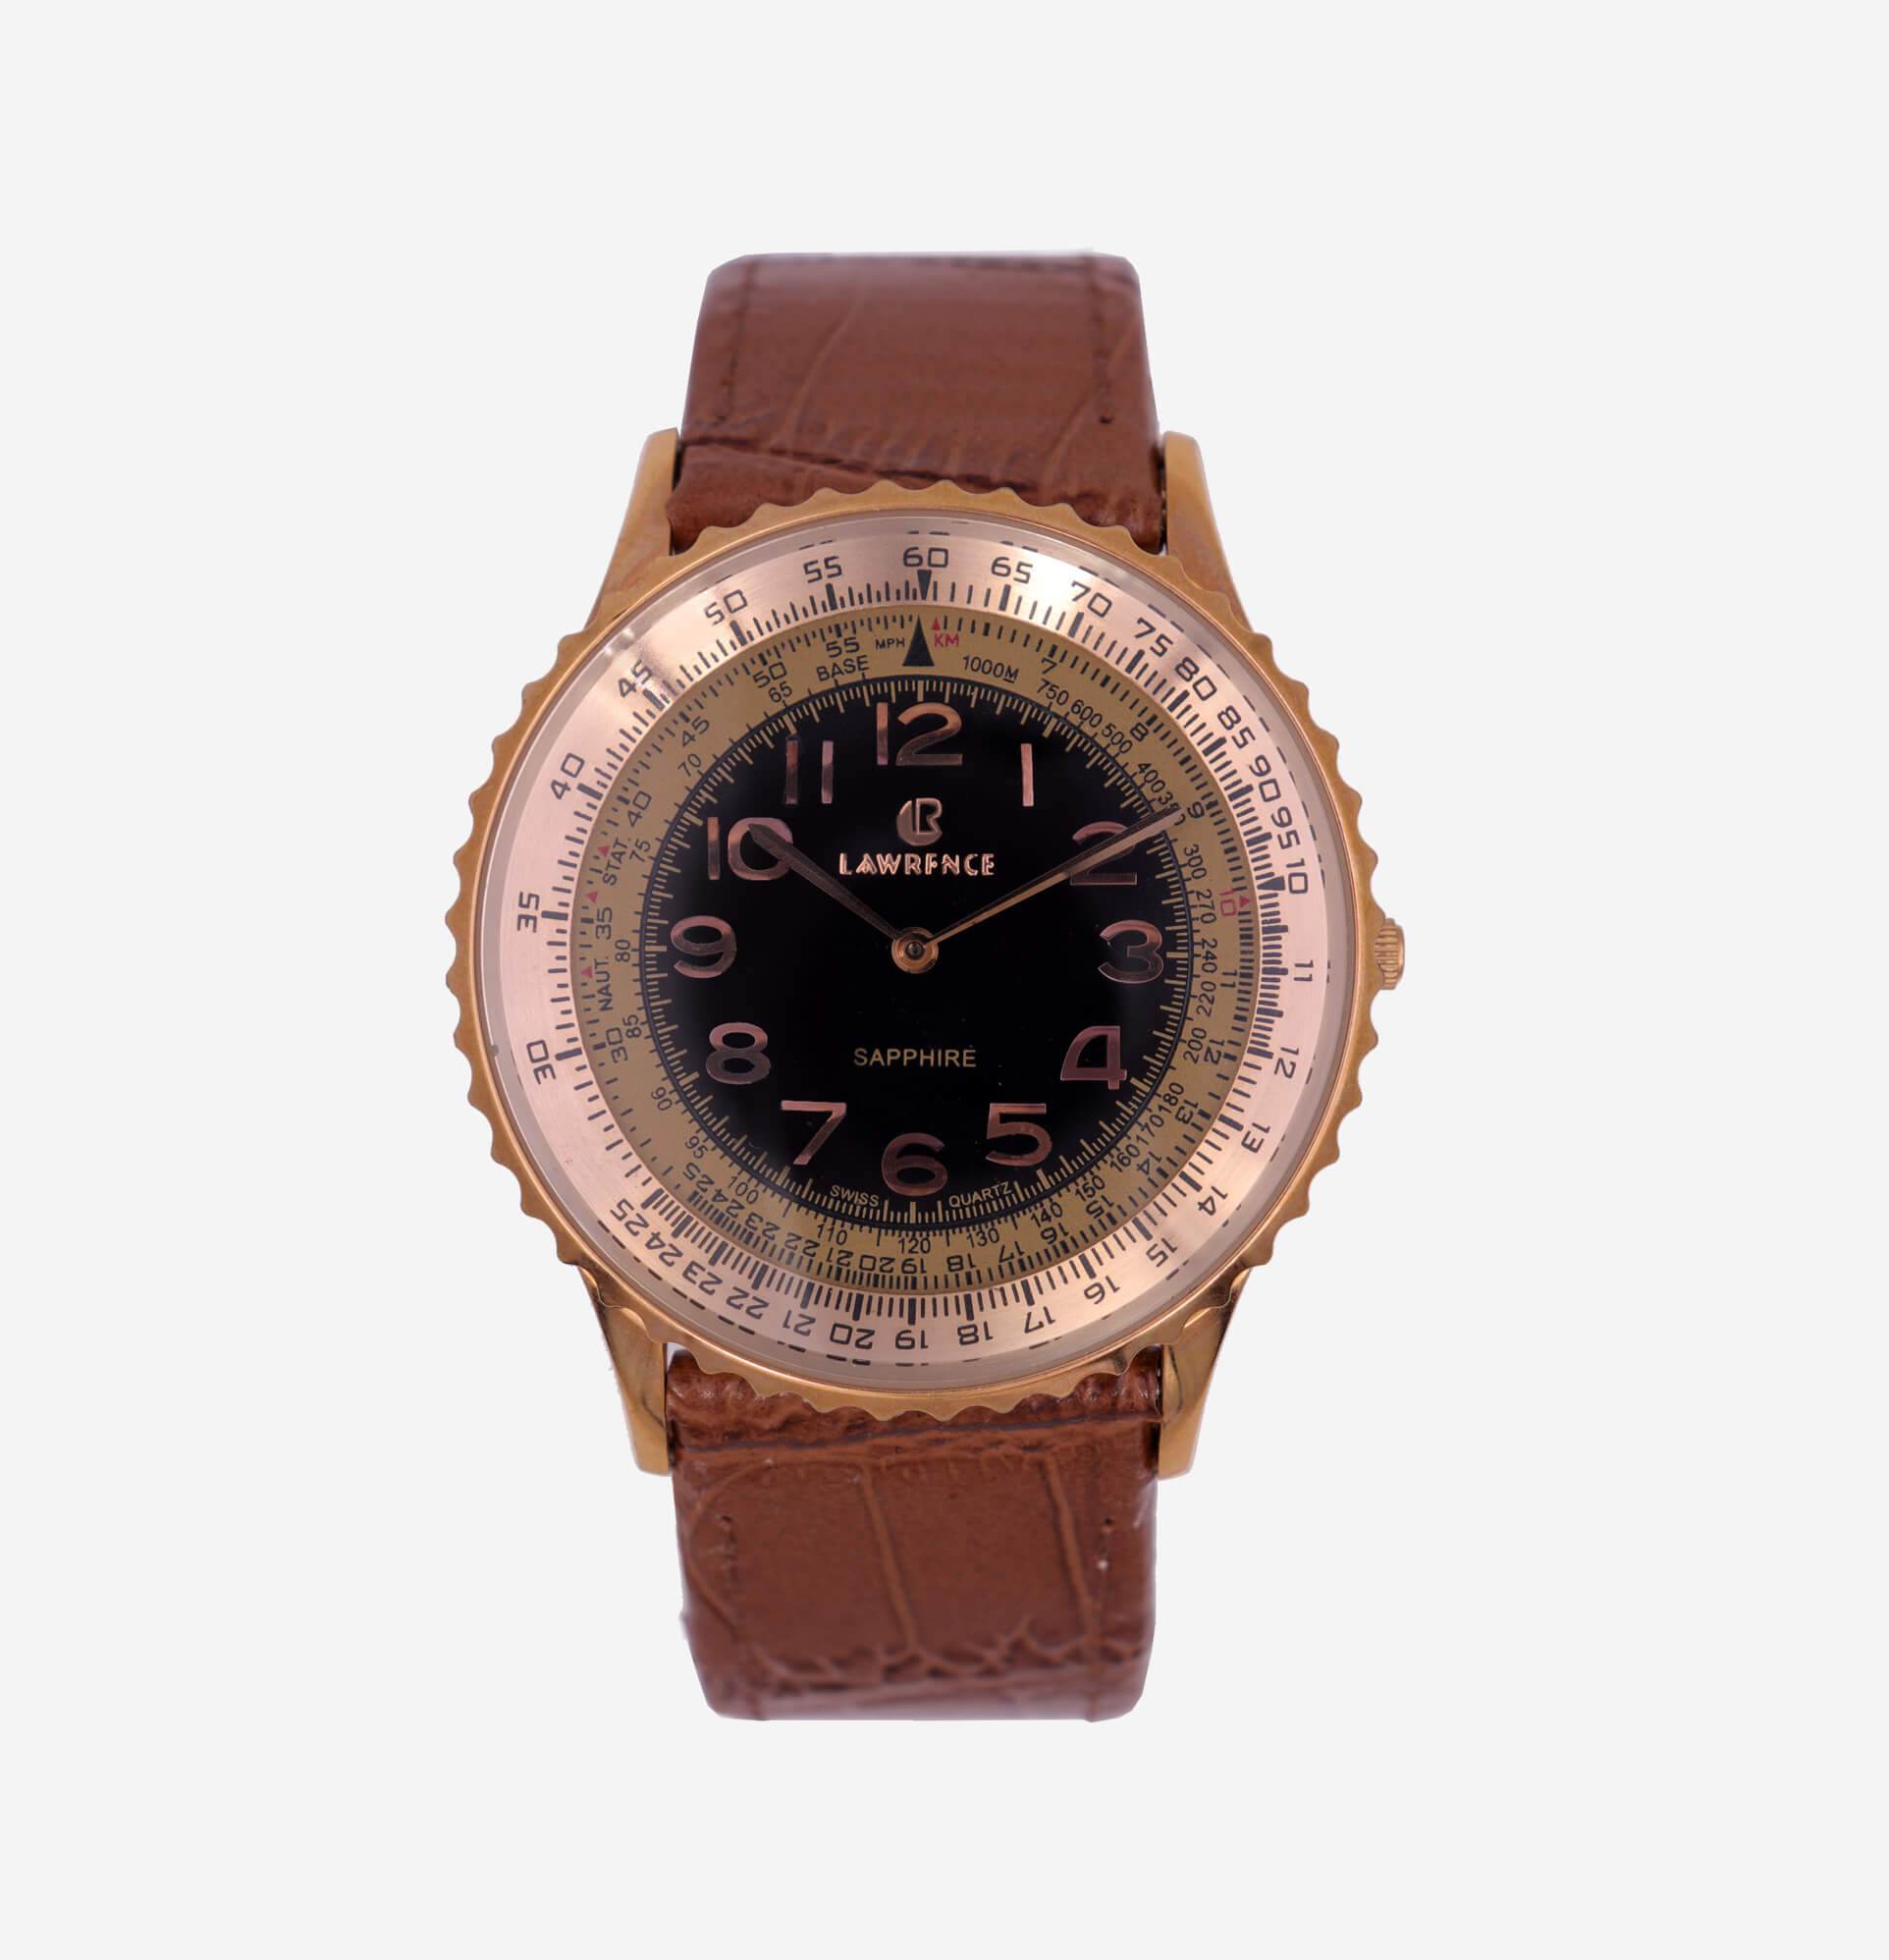 Analog Leather Watch LR-97 (Copper Tone)